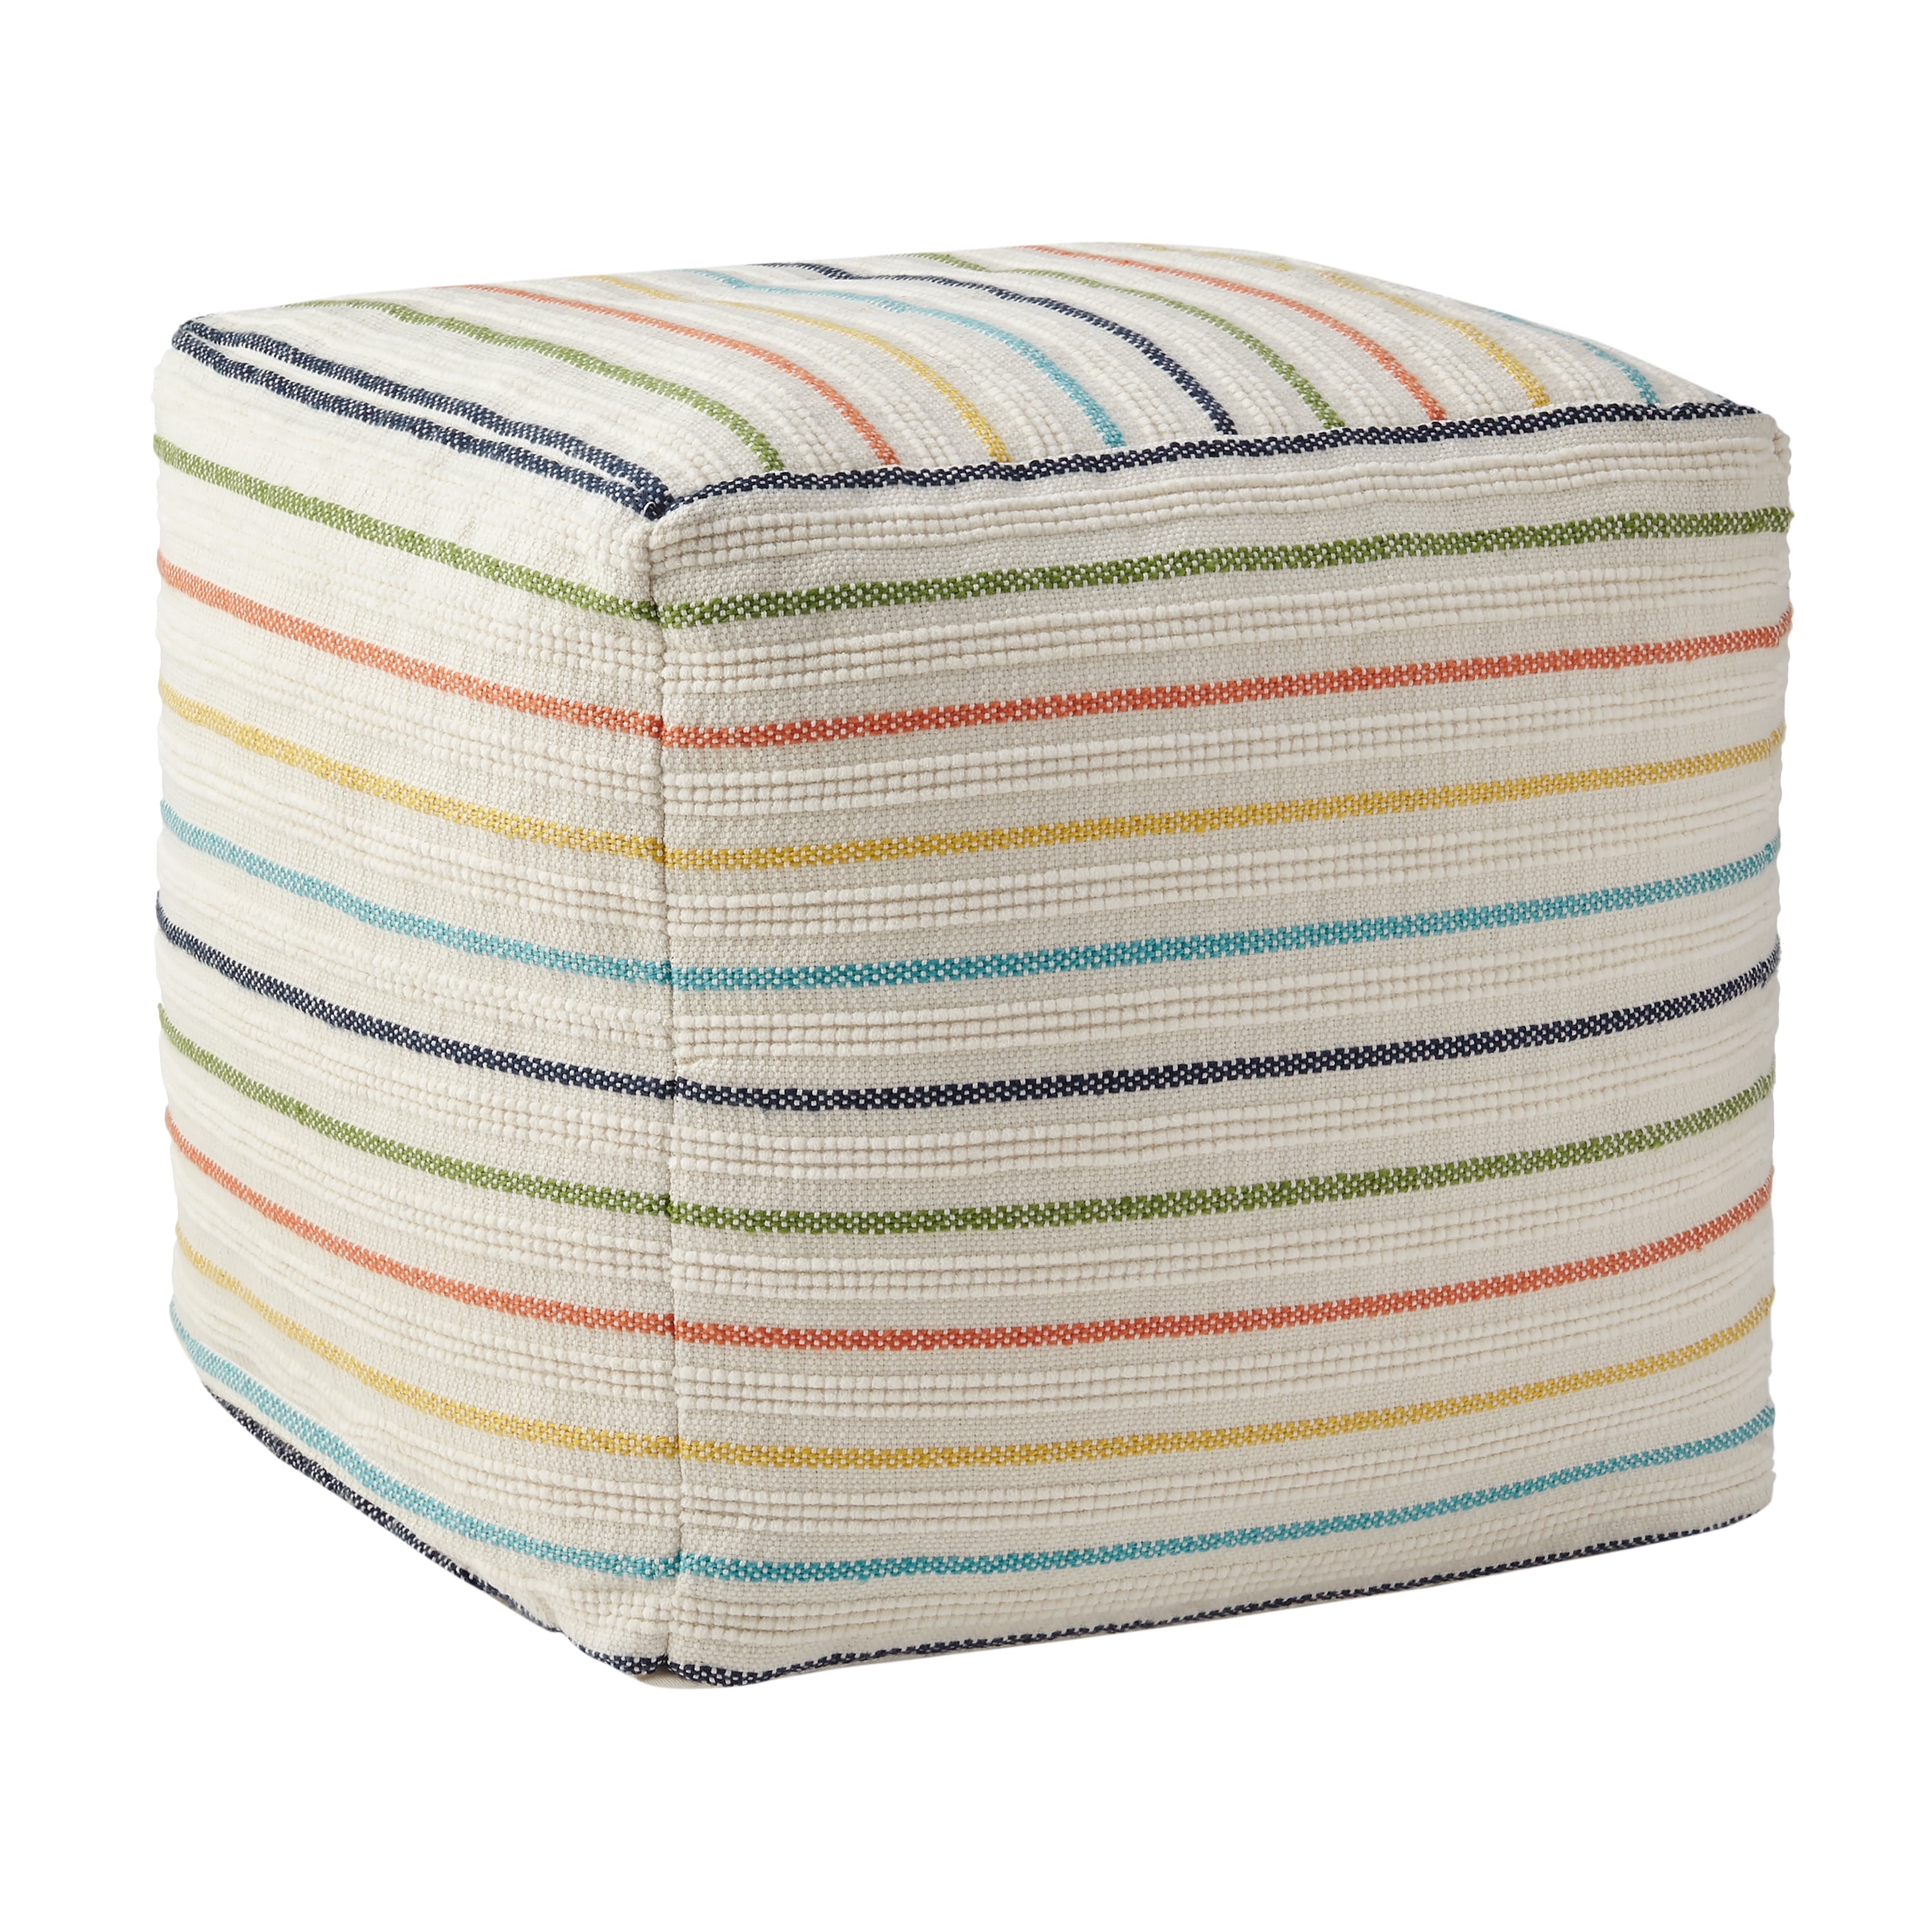 Better Homes & Gardens Stripe Outdoor Pouf, 16 inch, Multi-Color, Size: 16 inch x 16 inch x 16 inch